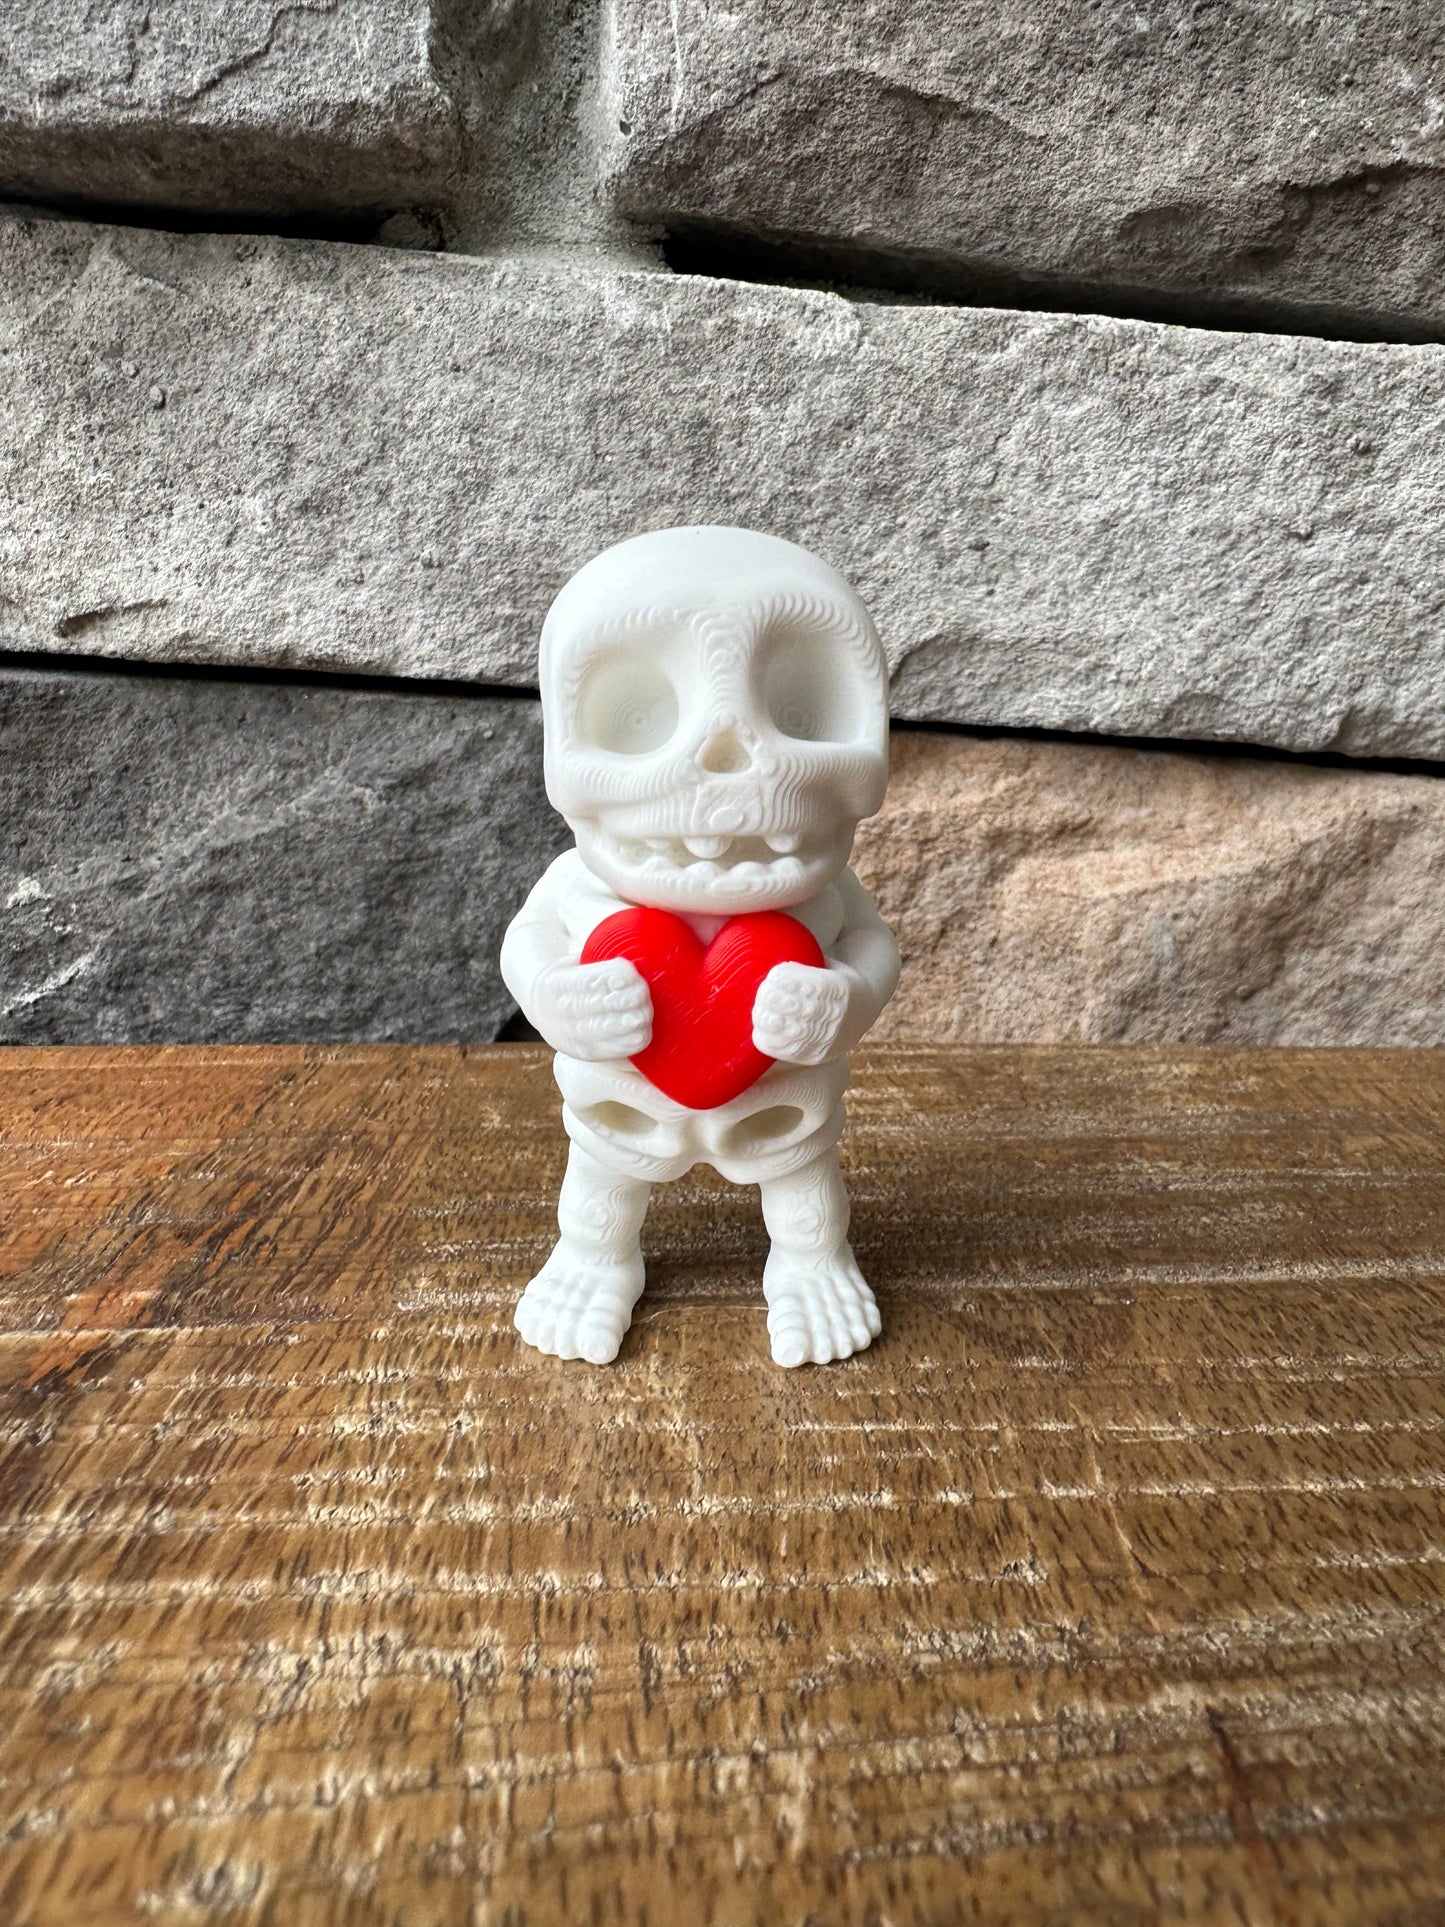 Tiny Skeleton with Heart | Tiny Collection | Multi Filament | 3D Printed | Articulated Flexible | Custom Fidget Toy